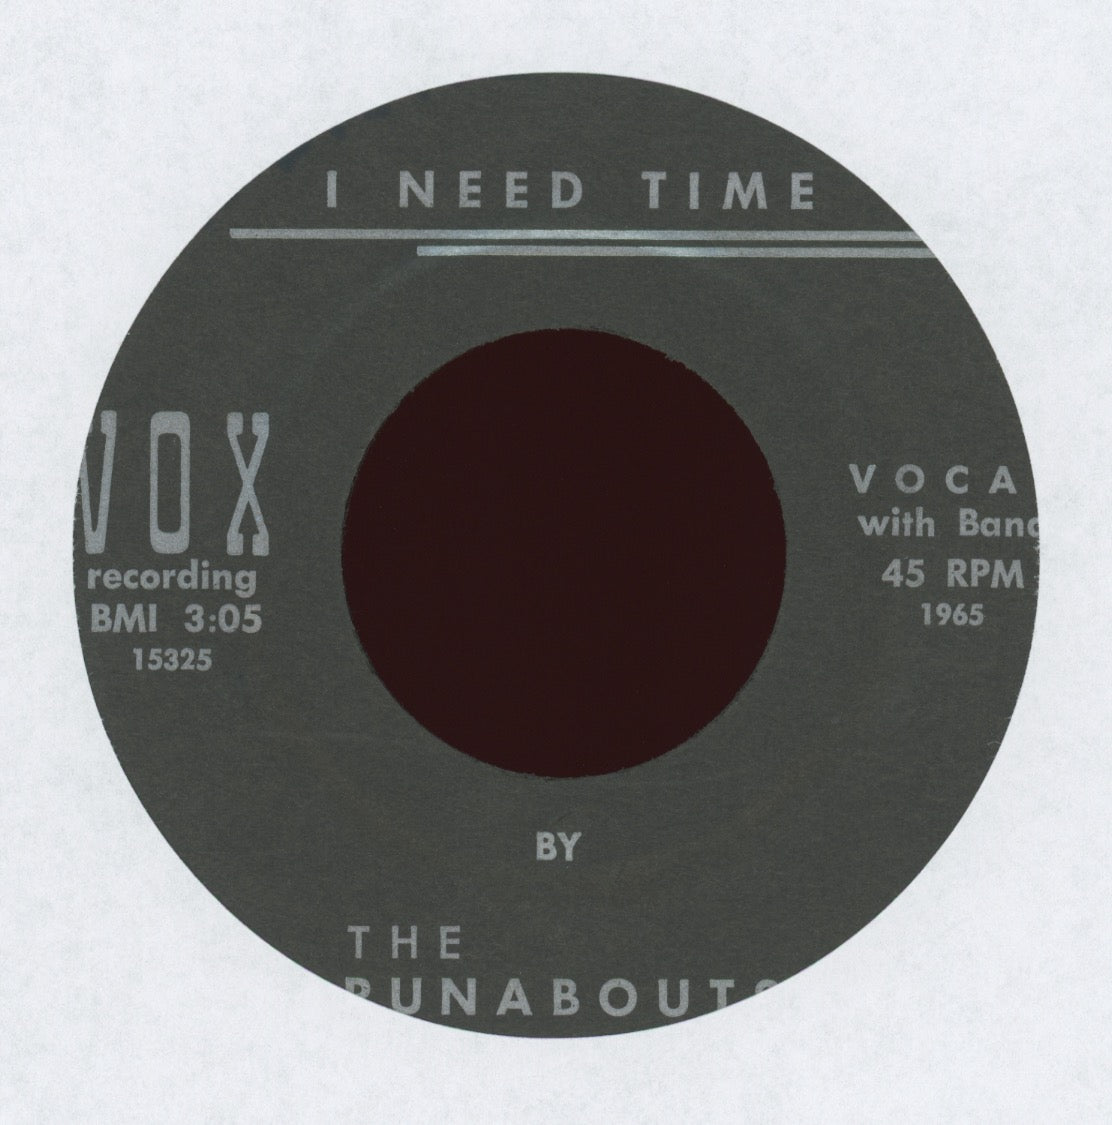 The Runabouts - I Need Time on Vox